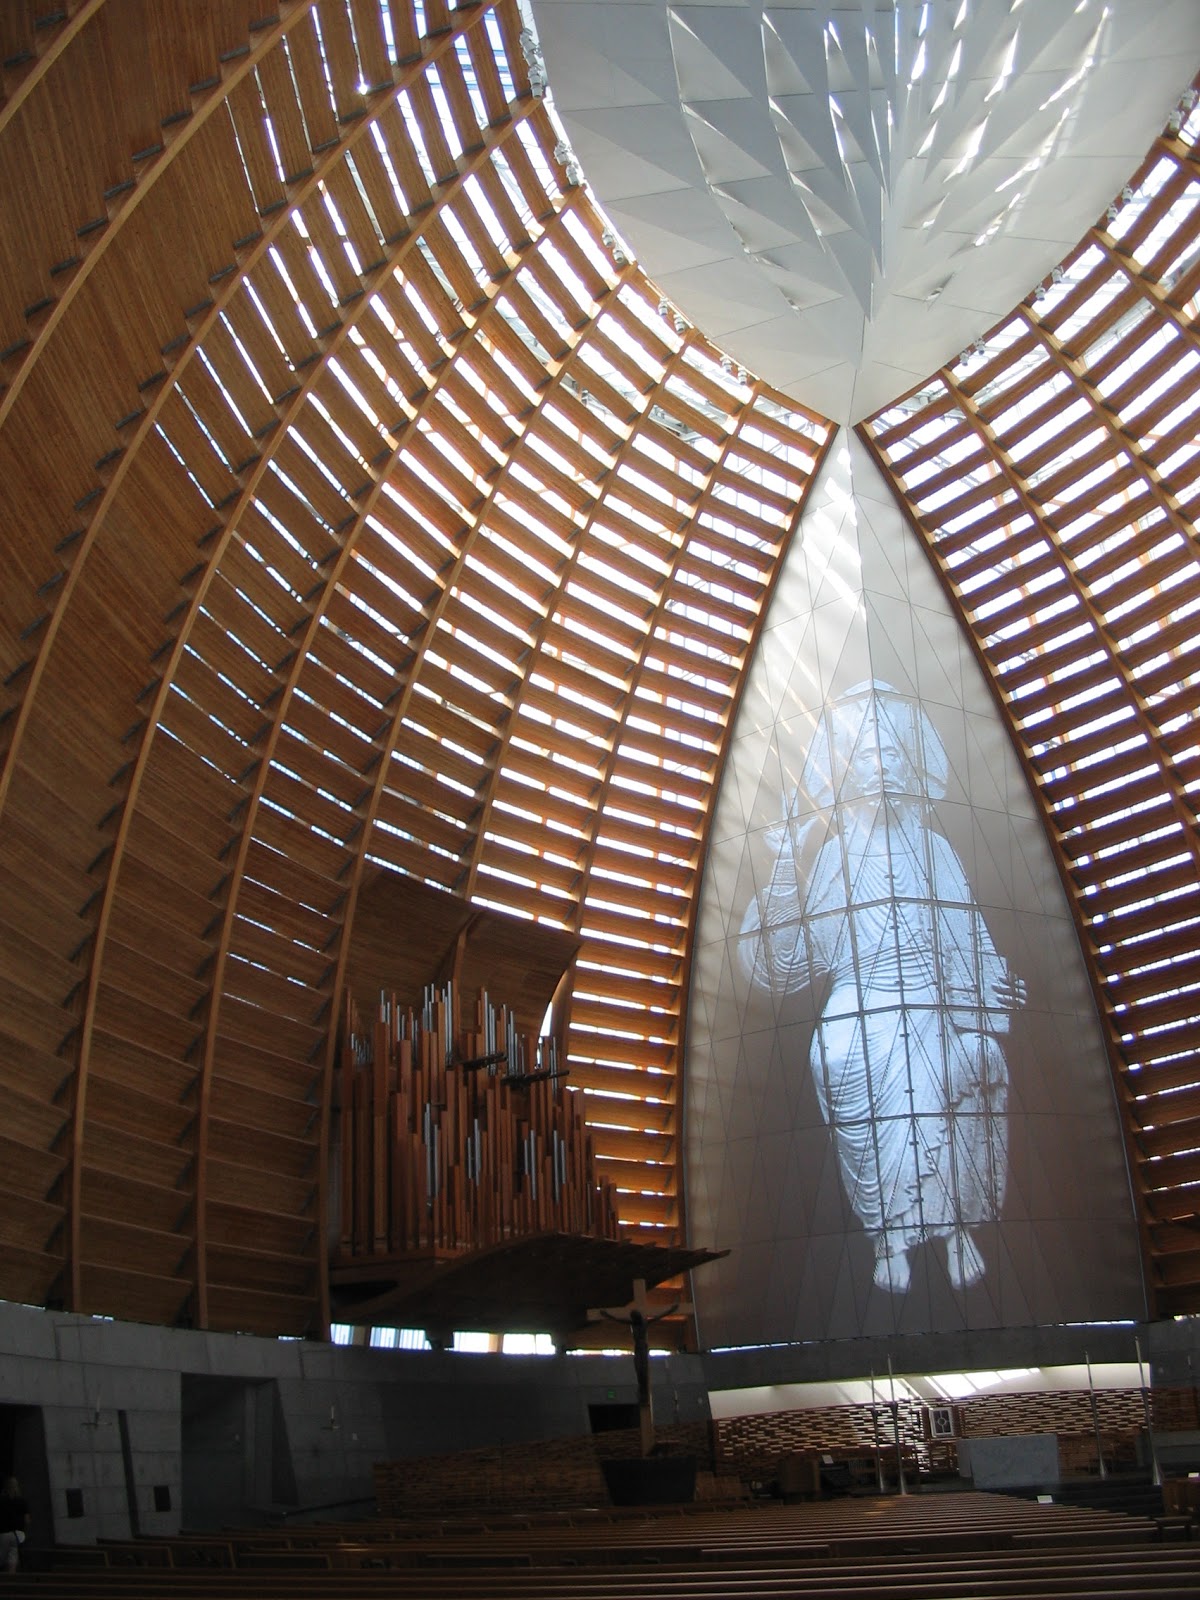 Thesis on light and church reuse